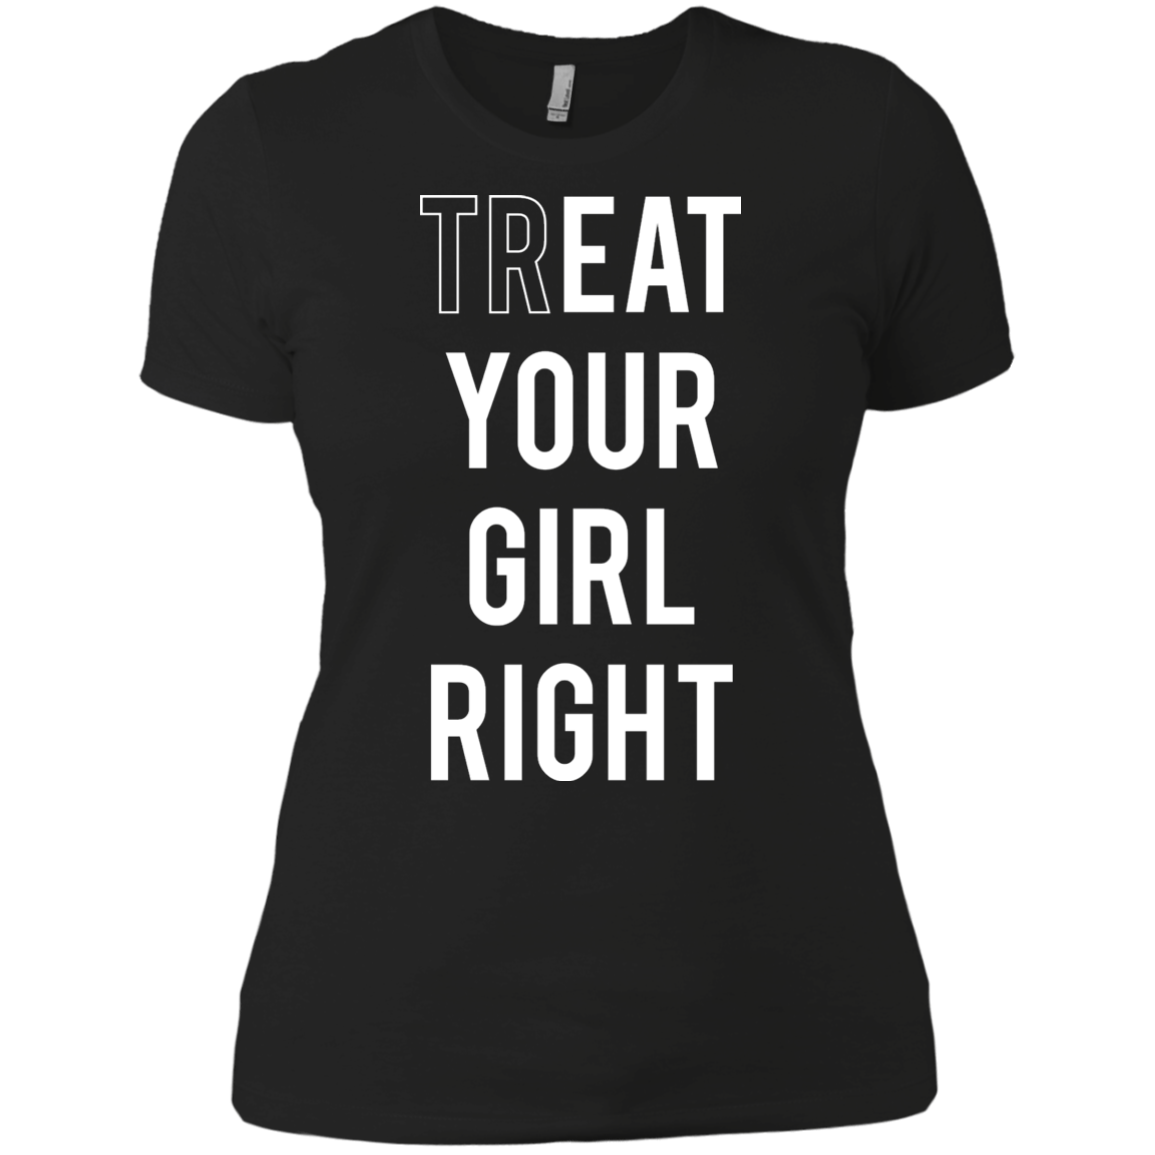 black funny quoted tshirt for girls/women/lesbian